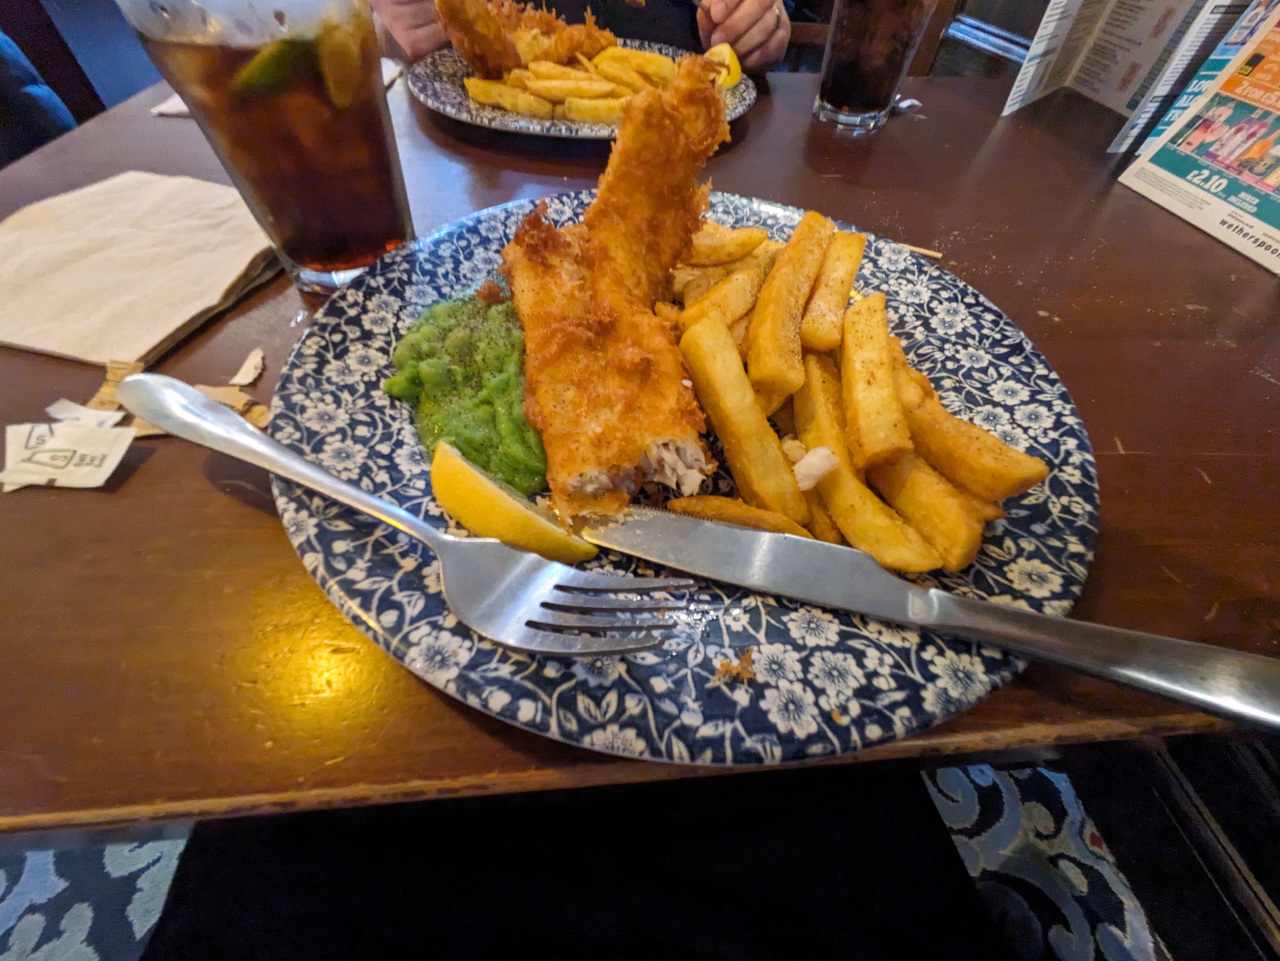 Cod &amp; Chips with Mushy peas, served with Pepsi Max.